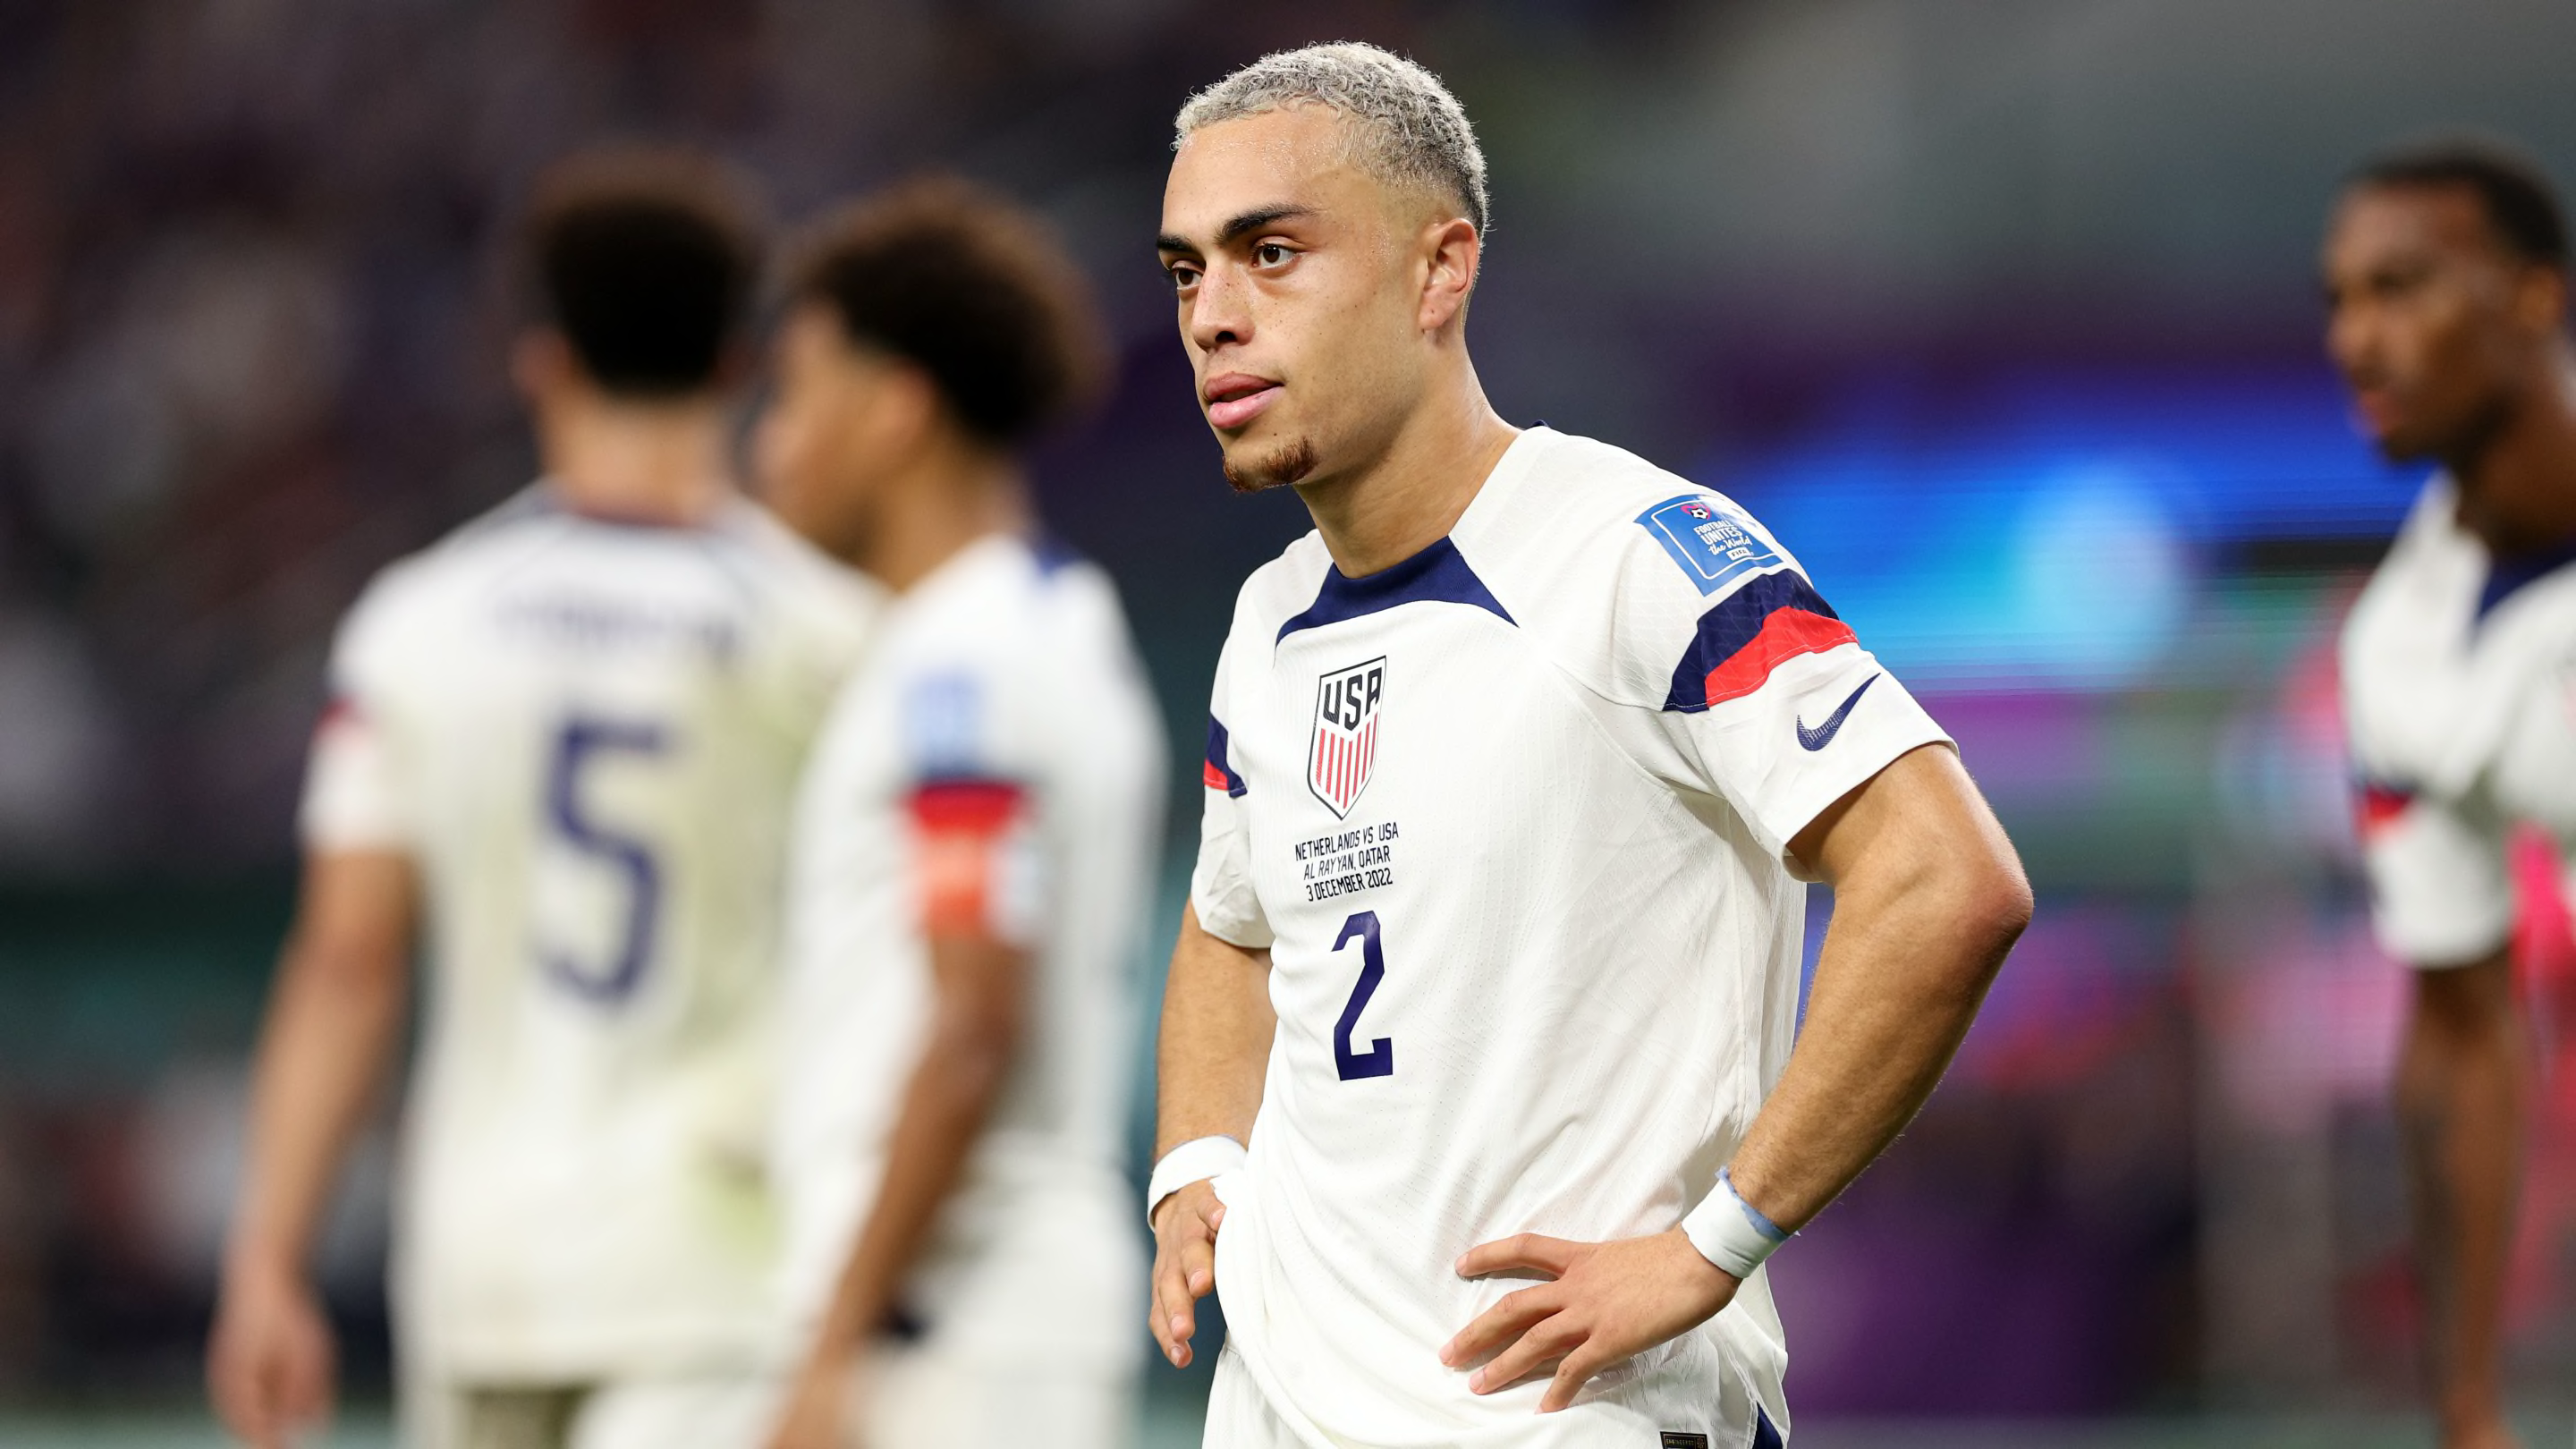 Netherlands 3-1 USA: Player ratings as Stars and Stripes bow out of World Cup